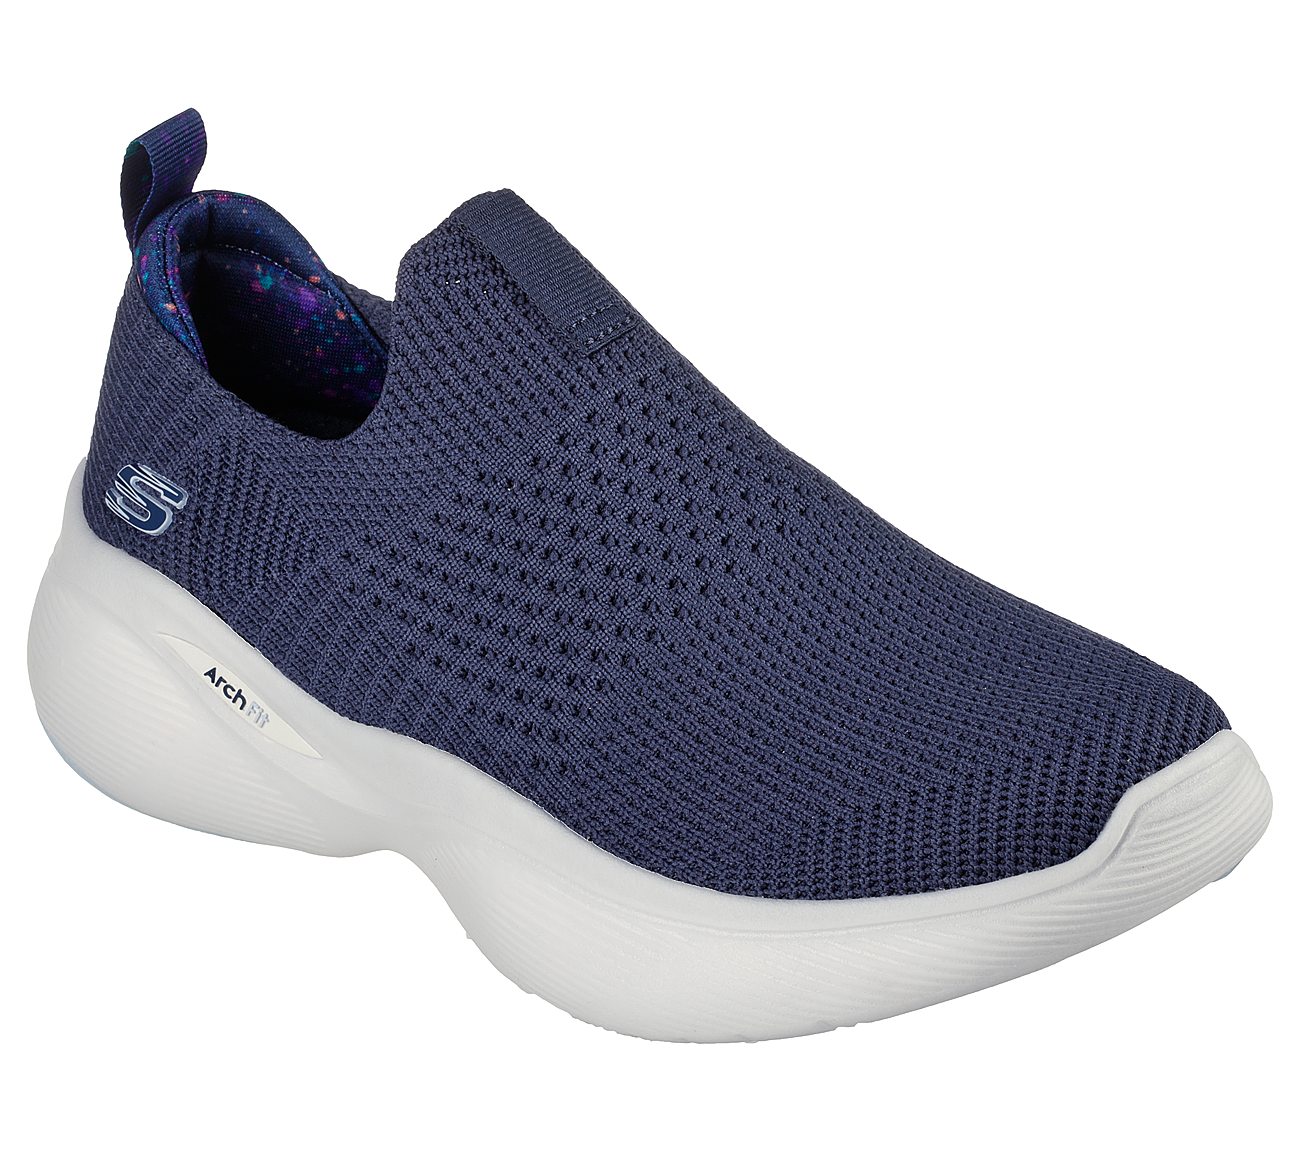 ARCH FIT INFINITY, NAVY/LAVENDER Footwear Lateral View